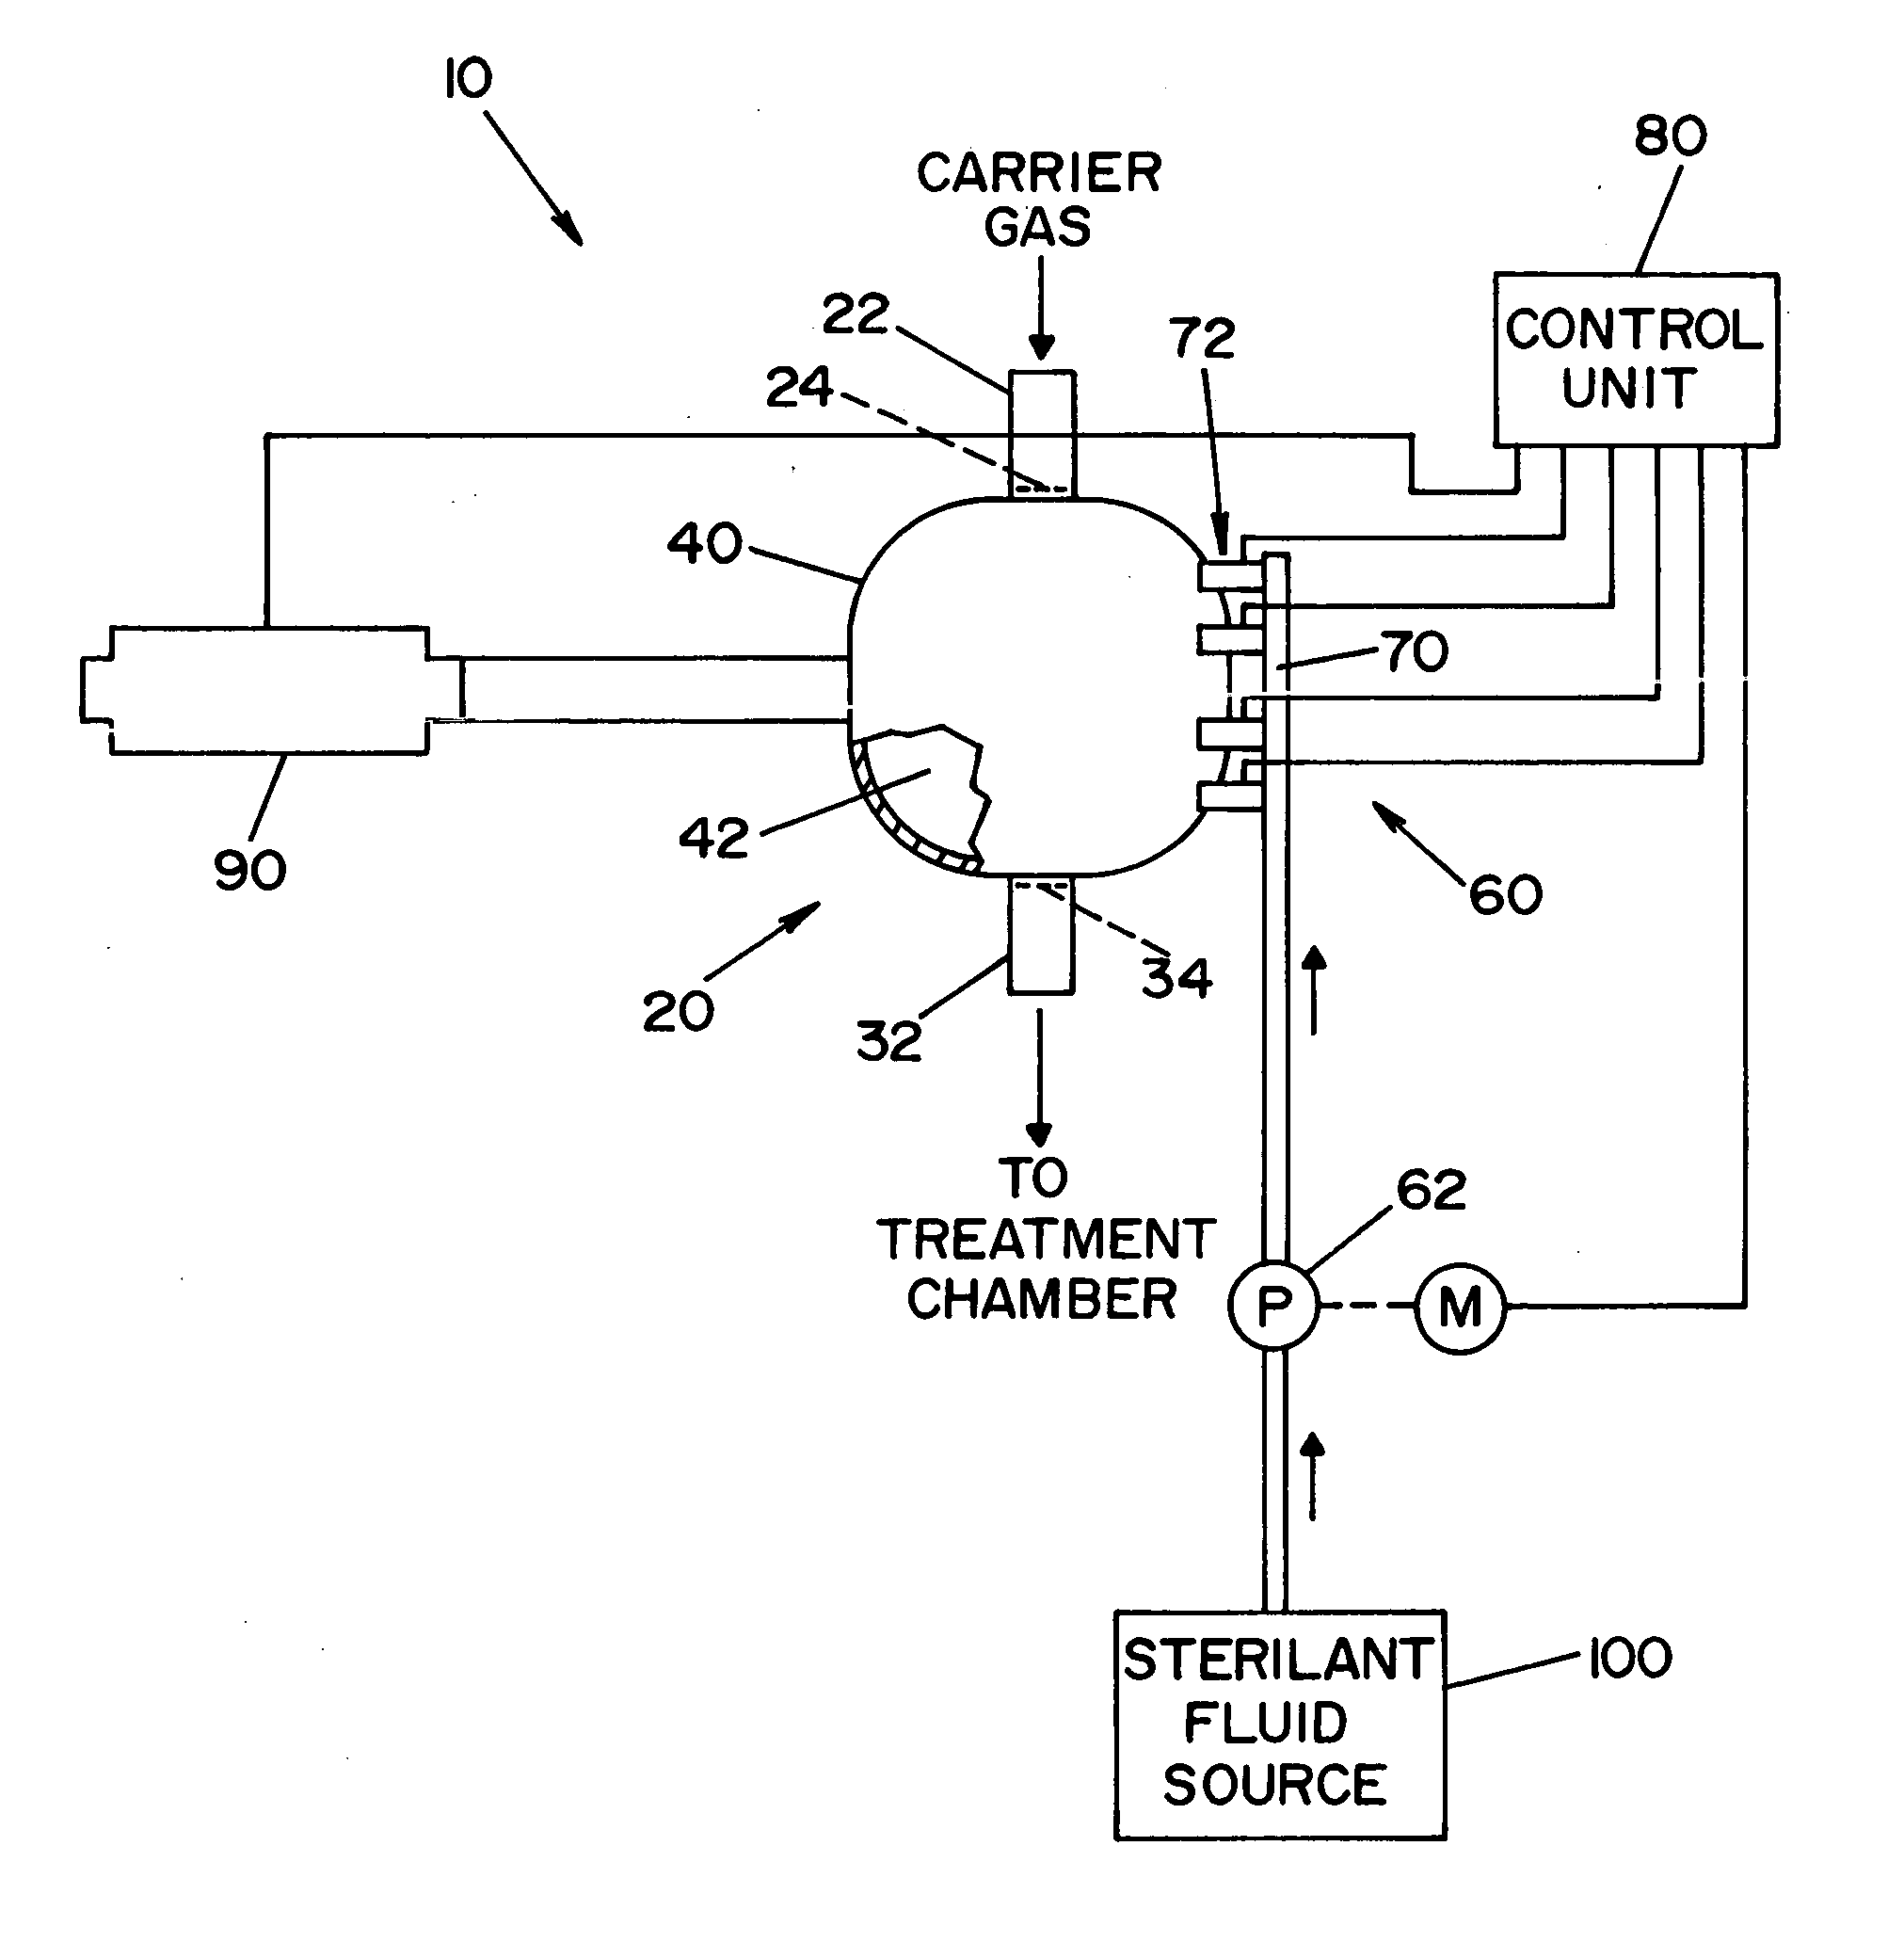 Method and apparatus for vaporizing a sterilant fluid using microwave energy